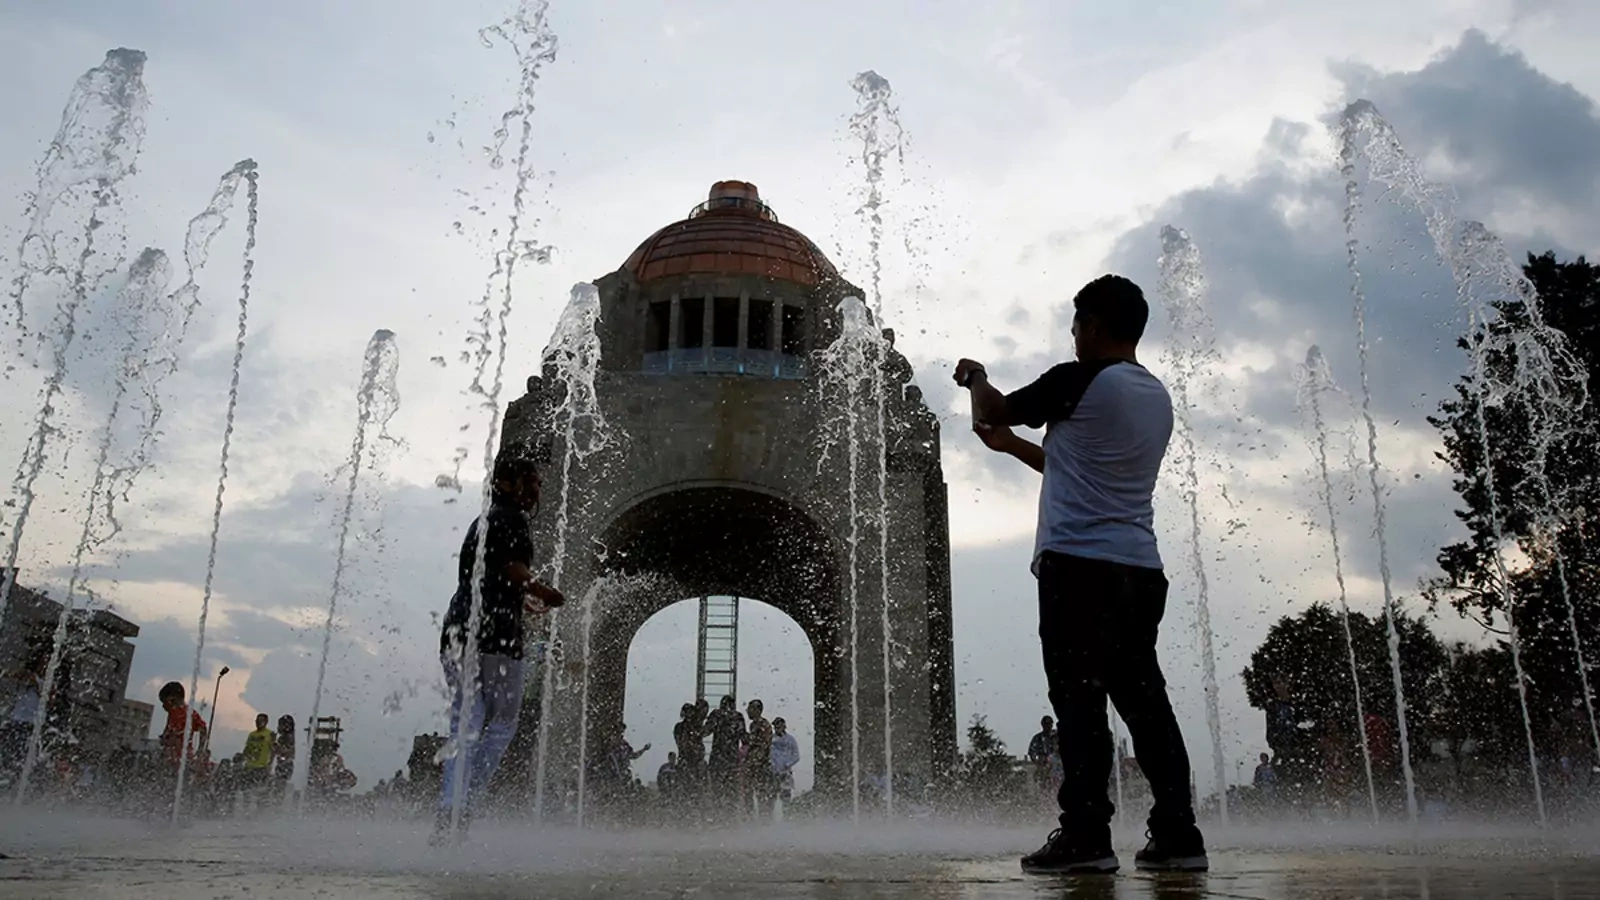 A man takes a picture by a fountain at the Monument of the Revolution in Mexico City.